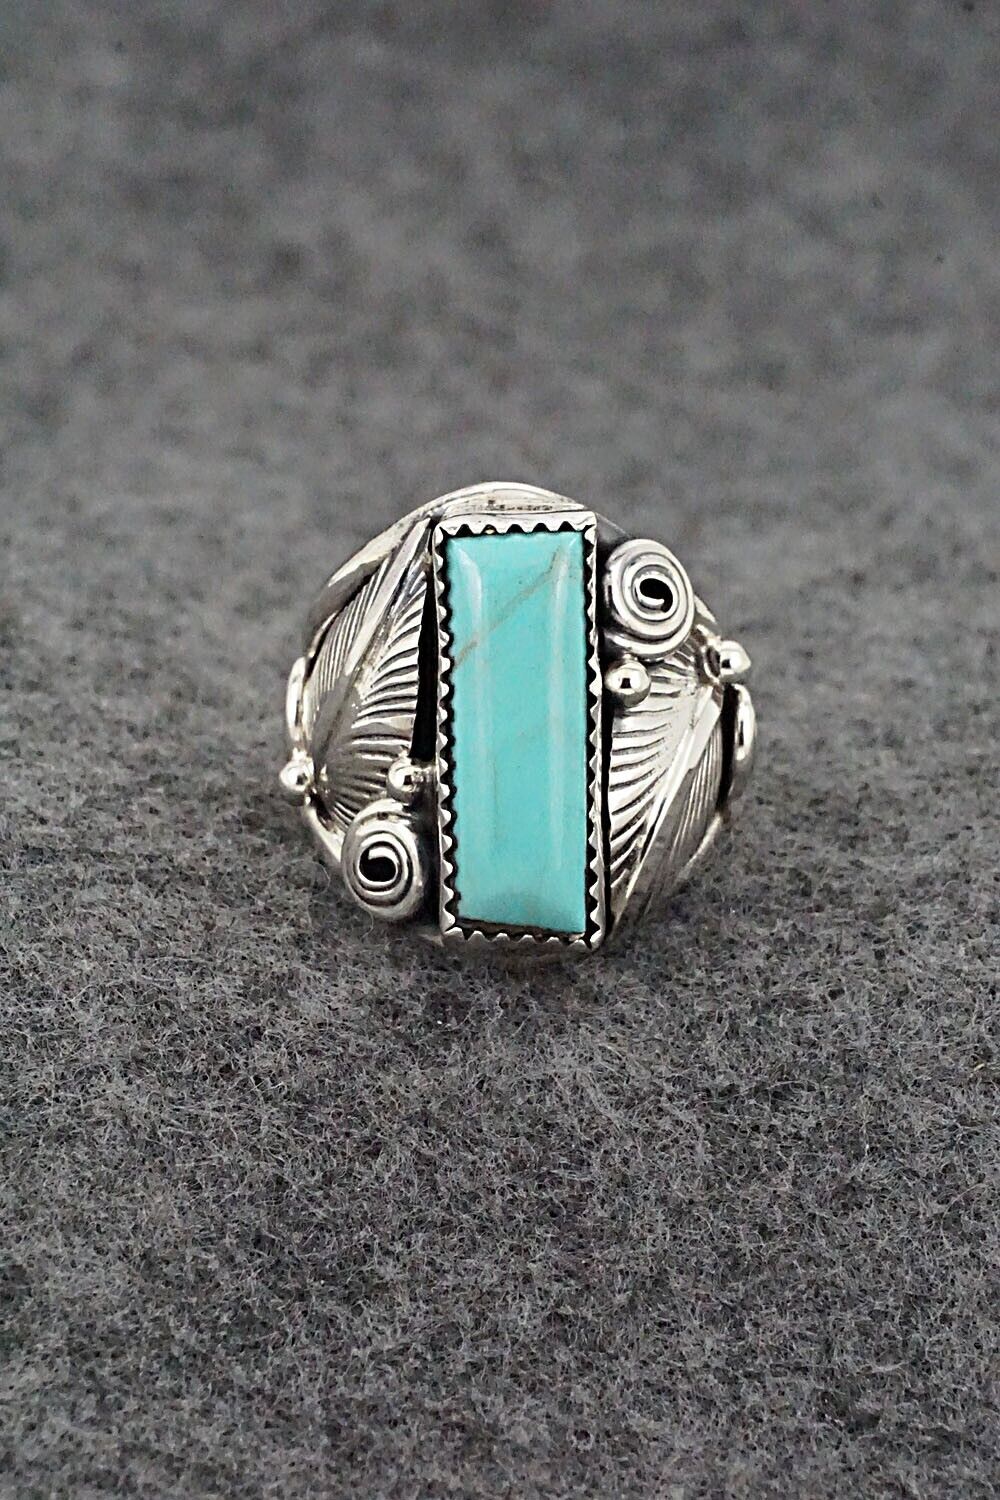 Turquoise & Sterling Silver Ring - Darrell Morgan - Size 8